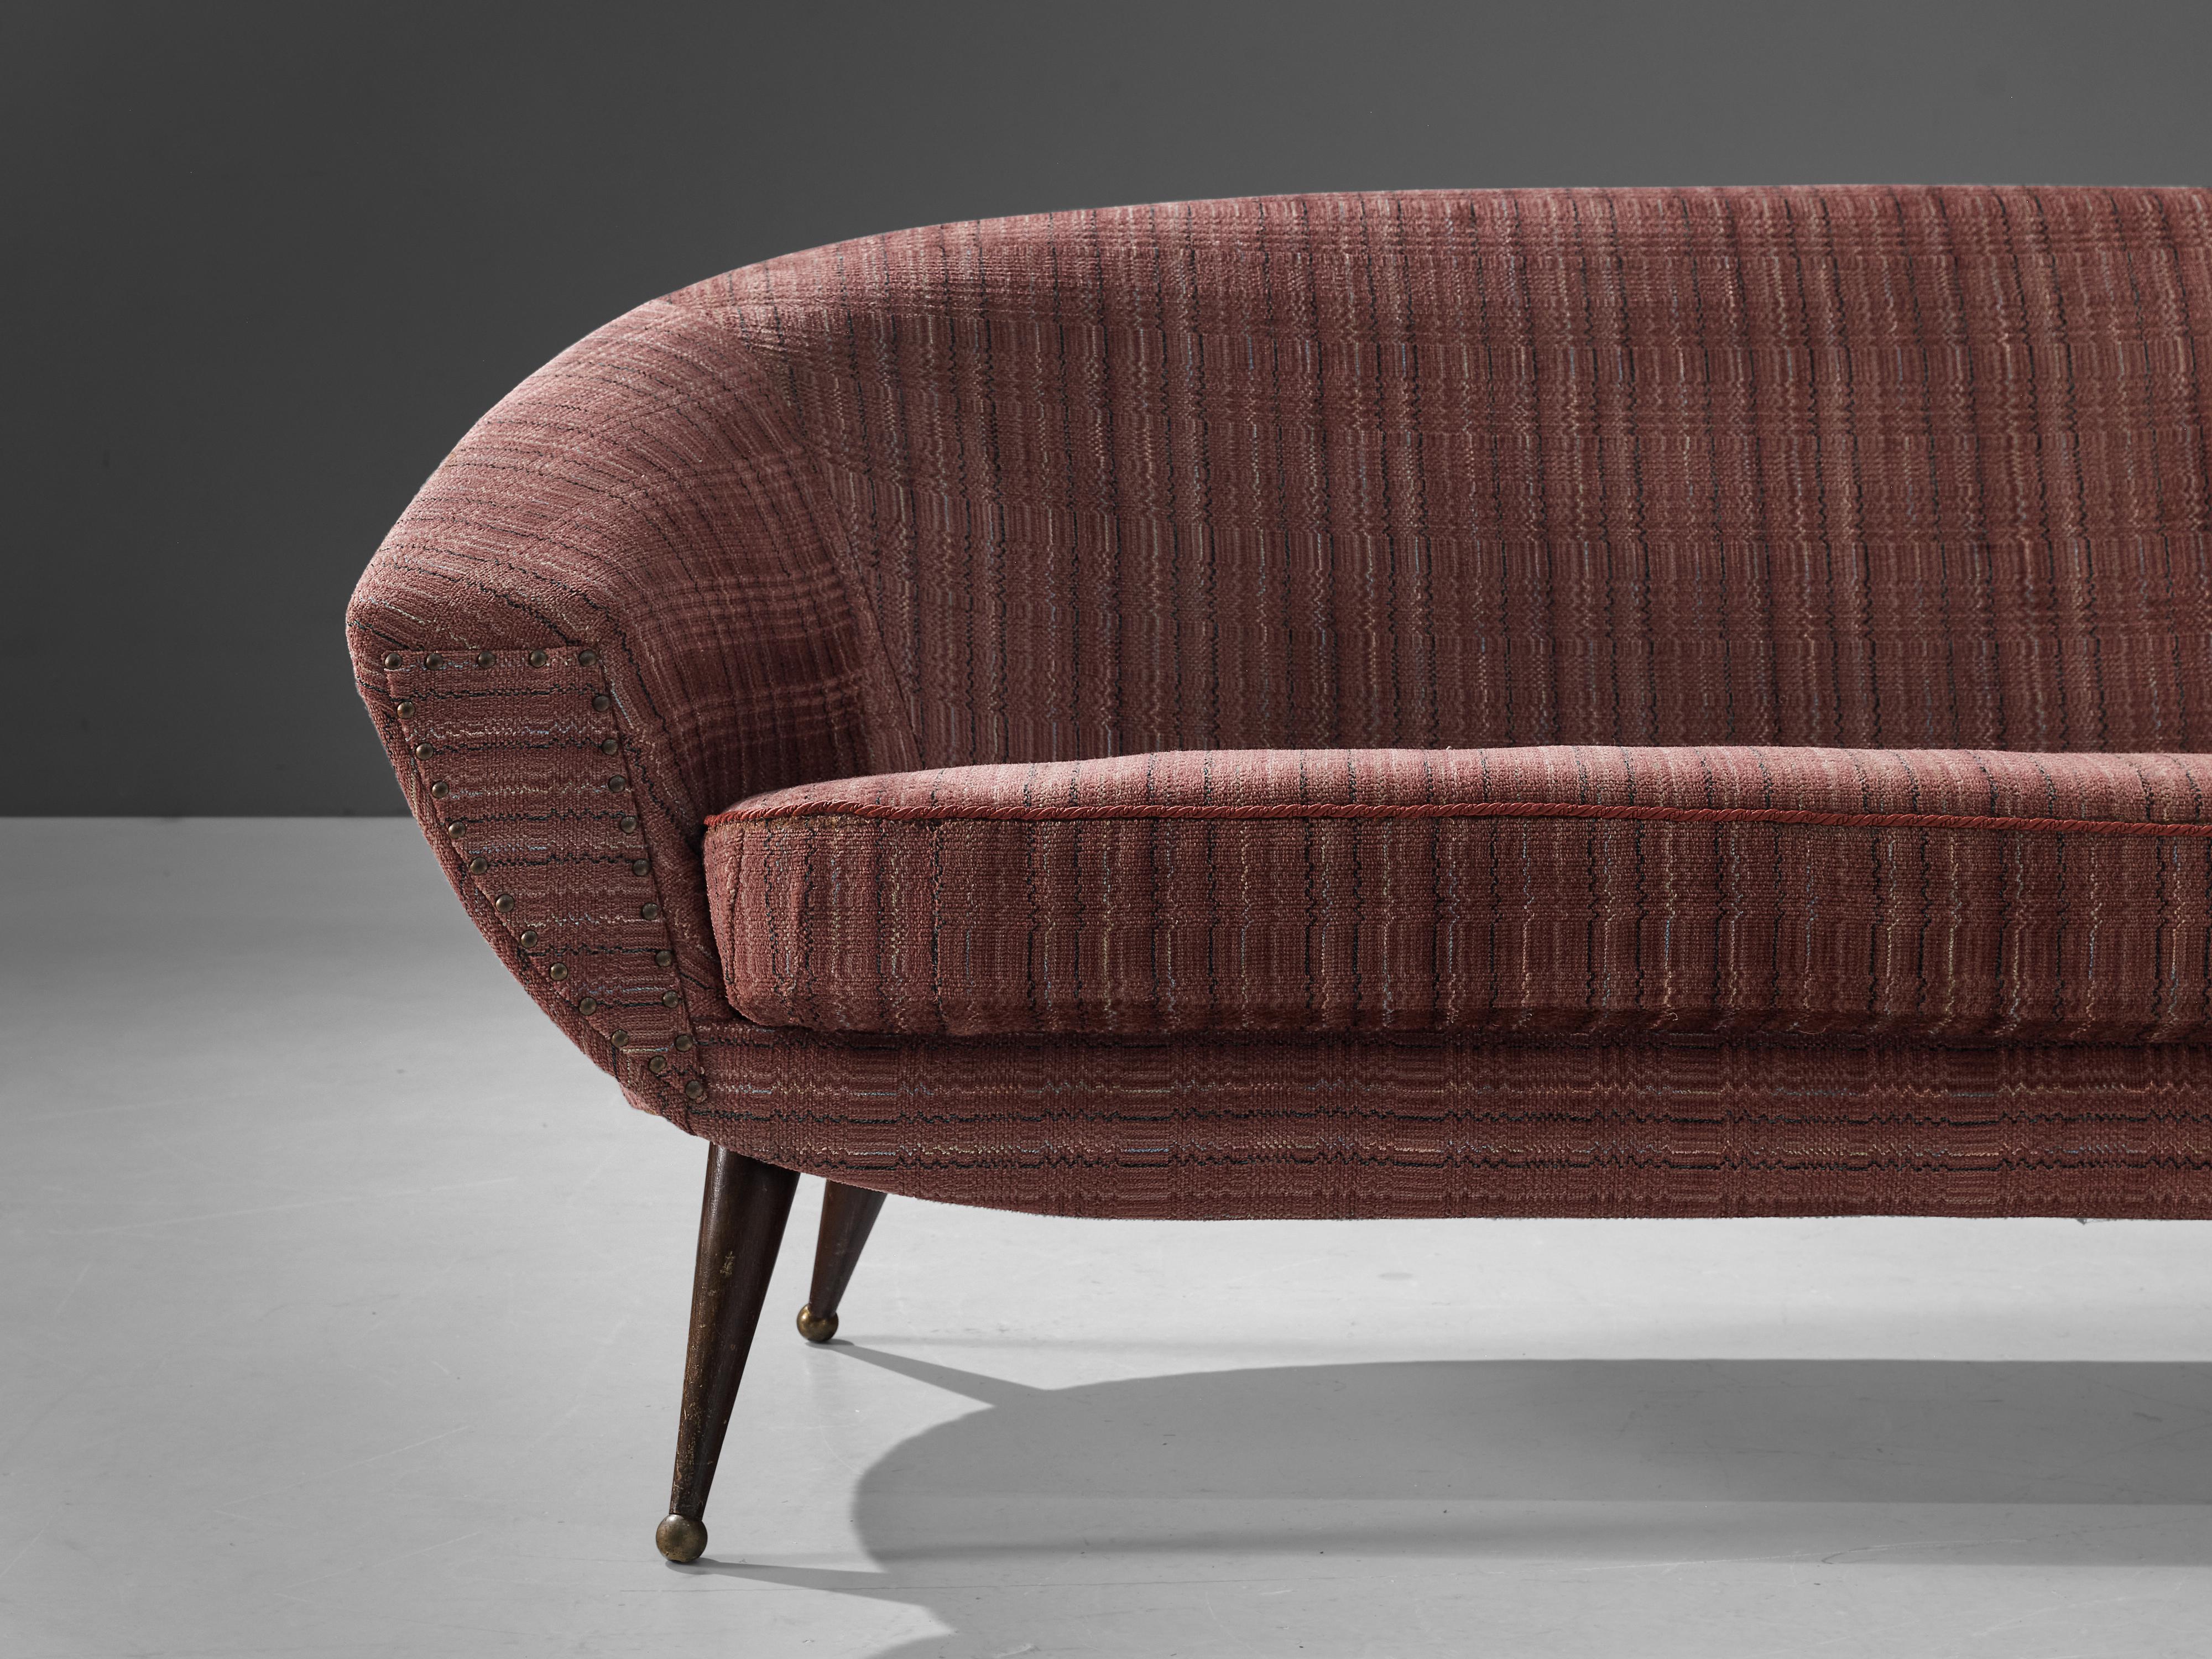 Folke Jansson, sofa model 'Tellus', fabric, wood, brass, Sweden, 1956.

Exquisite sofa designed by the Swedish designer Folke Jansson, featuring graceful lines that captivate the eye. Four subtly carved wooden legs are adorned with a touch of brass